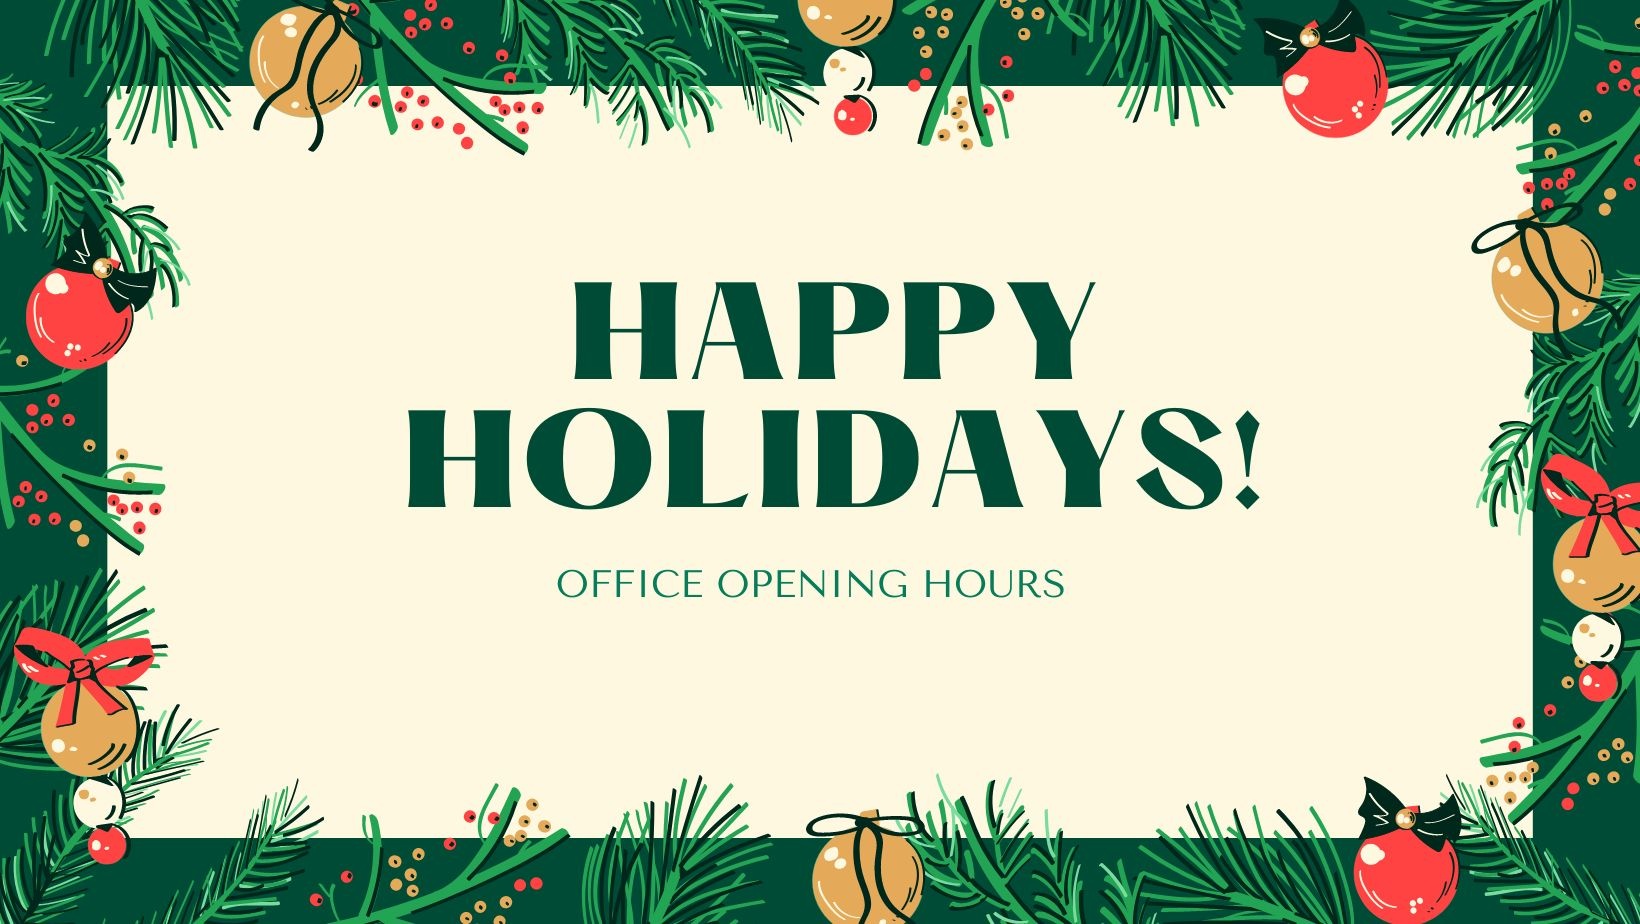 Notice: Office Opening Hours